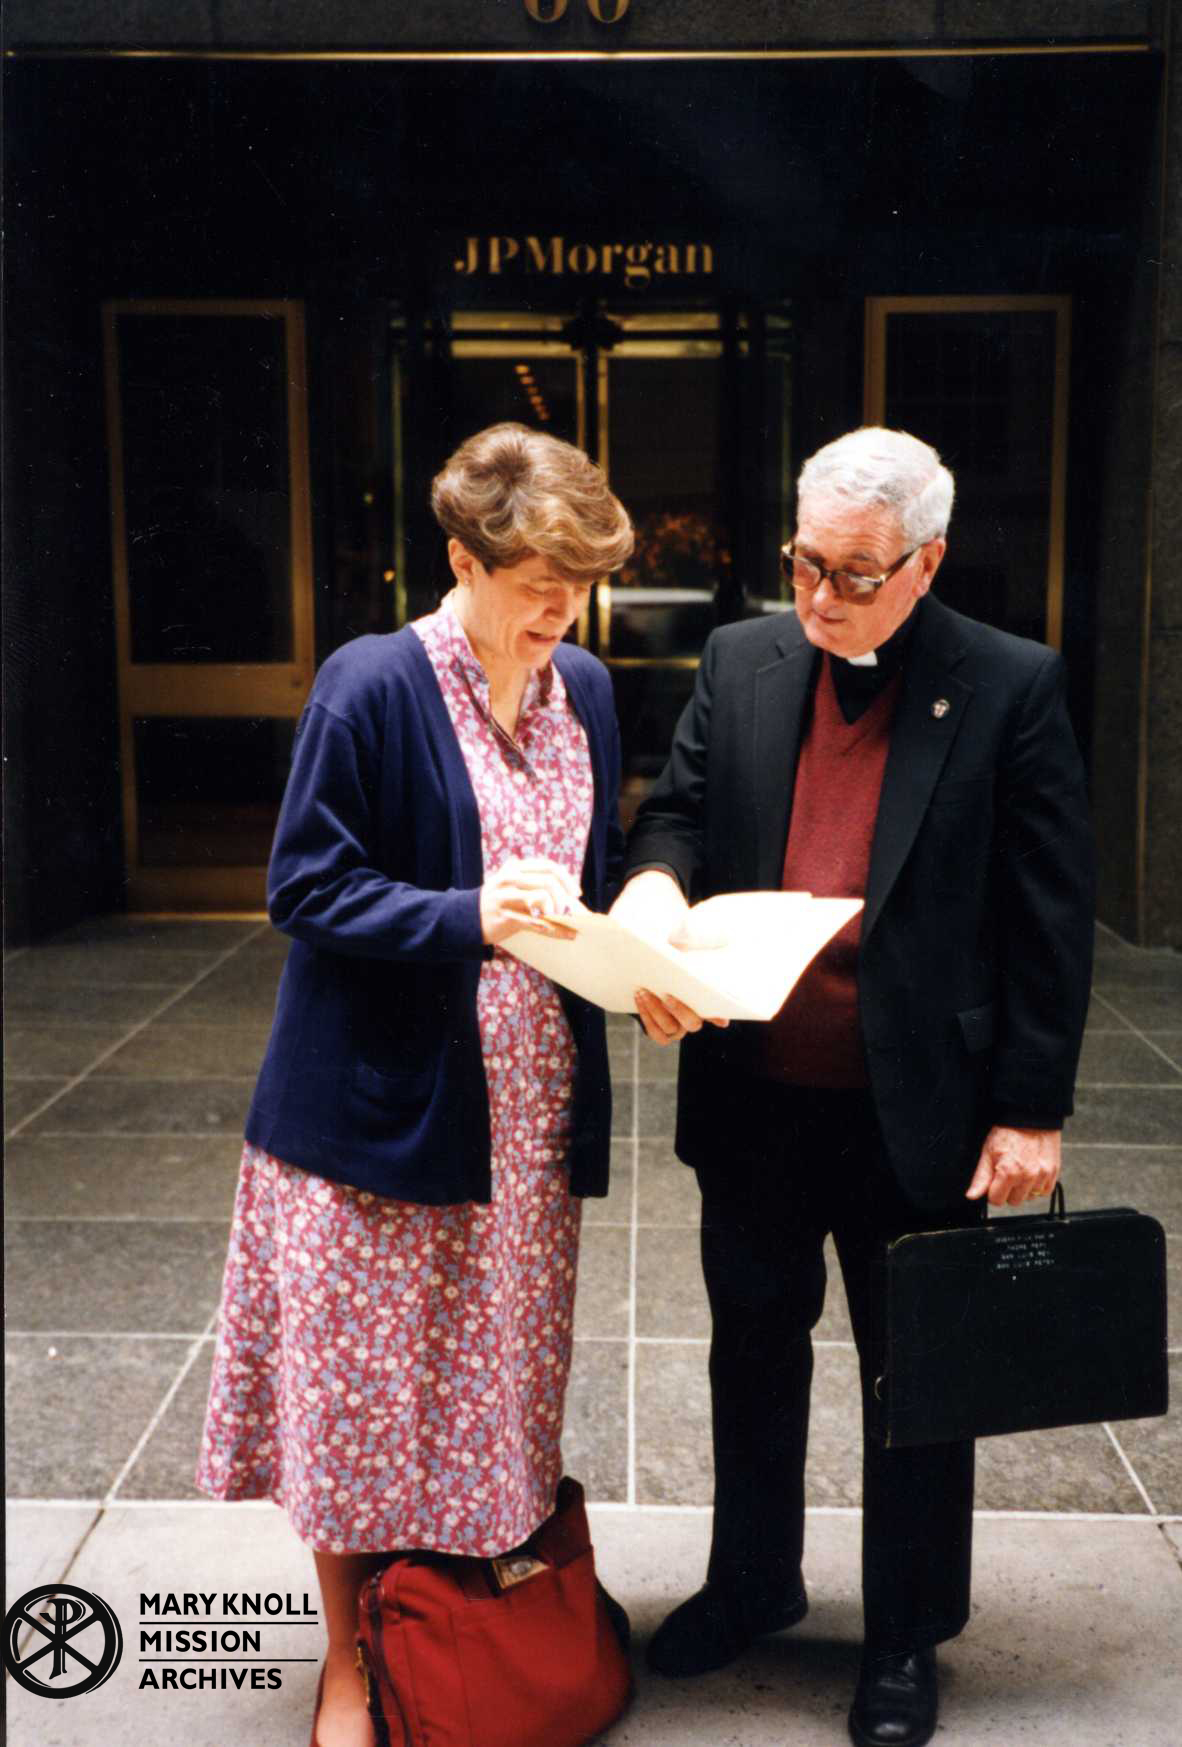 Father La Mar in front of J. P. Morgan offices in New York City